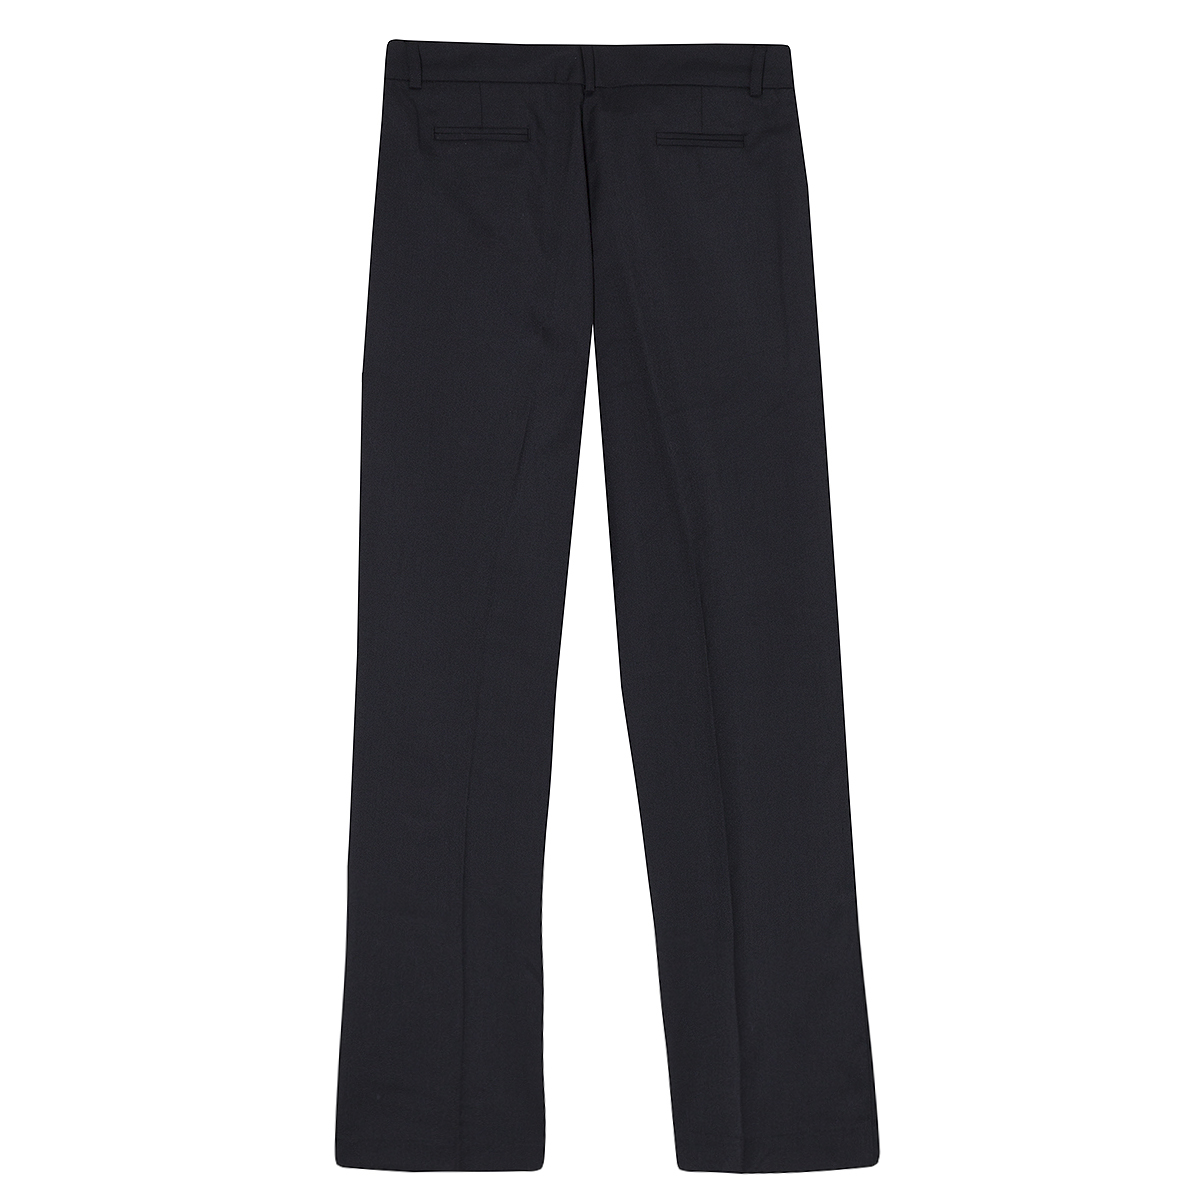 Ladies Womens Work Trousers Business Office Formal Straight Leg Pants Size  6-14